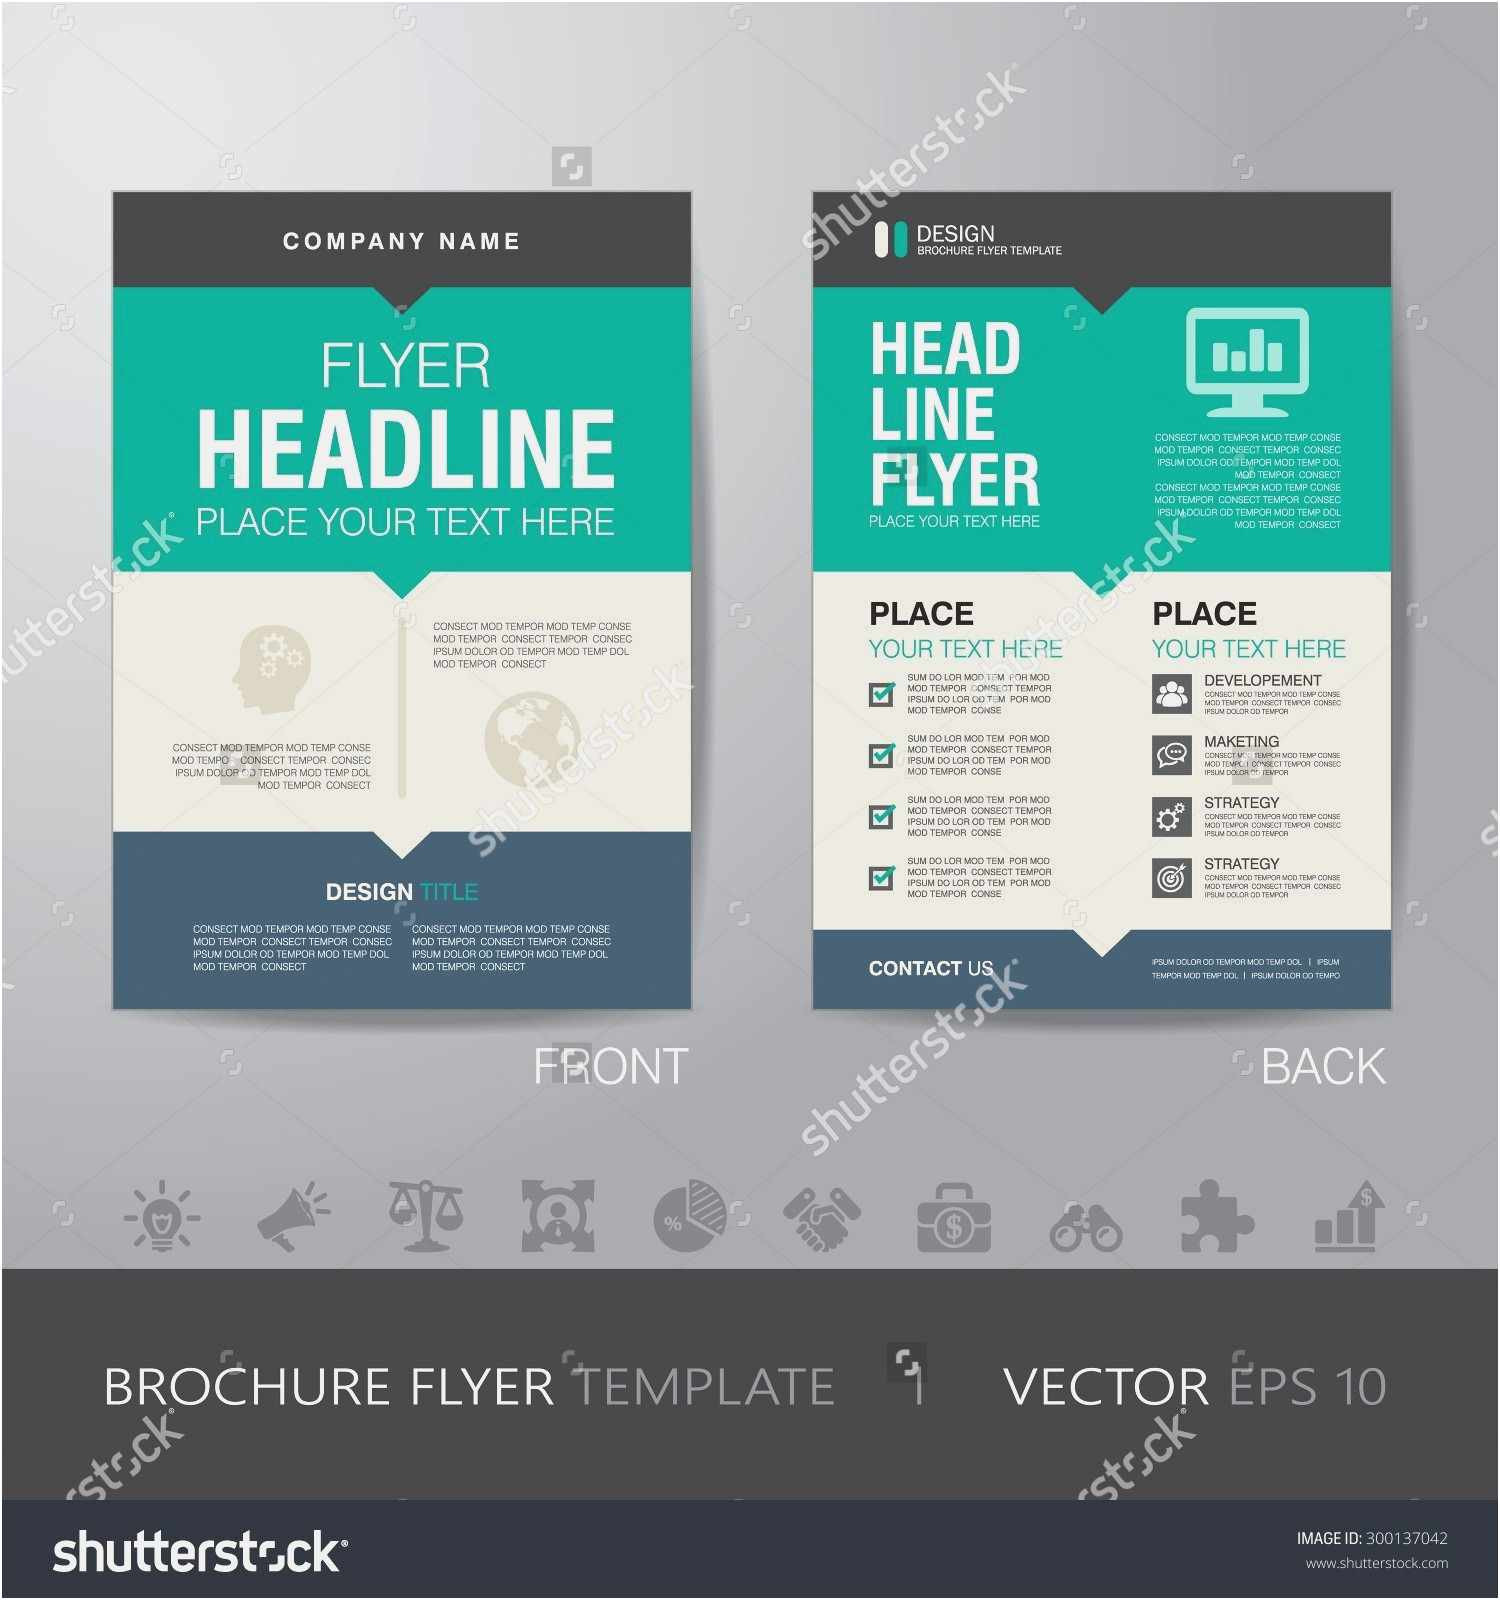 Free Collection 54 Free Business Card Templates Professional Of Business Card Template software